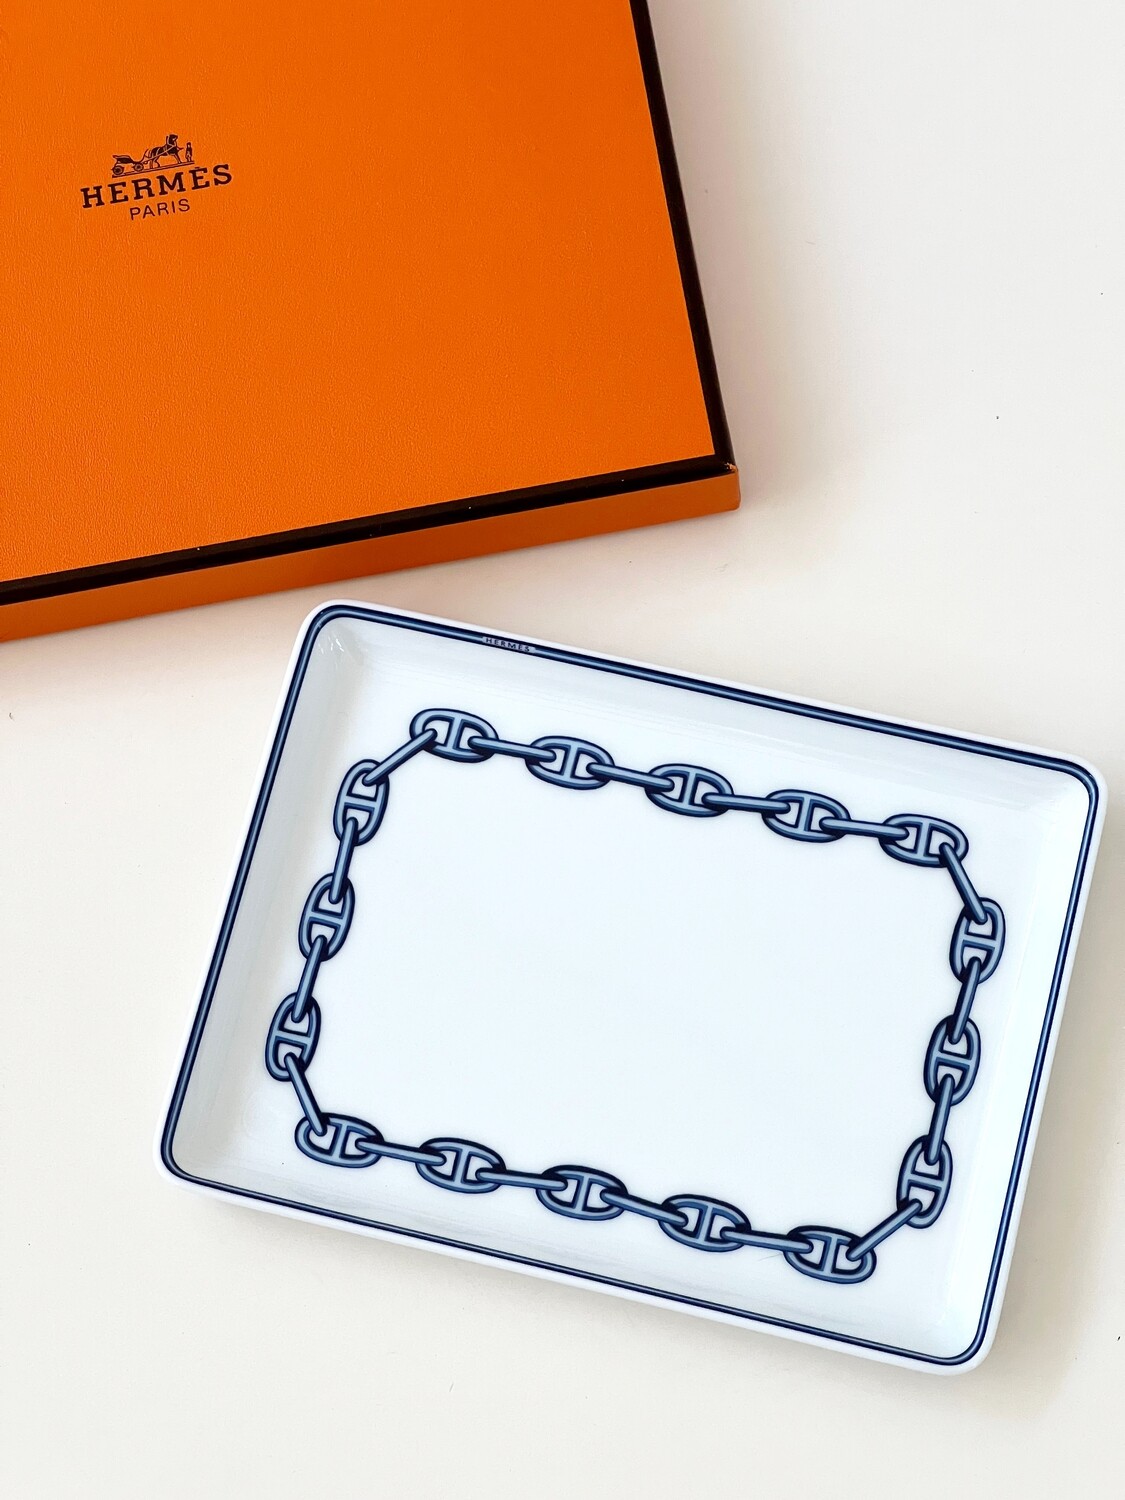 ​VINTAGE HERMES PARIS CHAIN D'ANCRE TRINKET TRAY WITH BOX